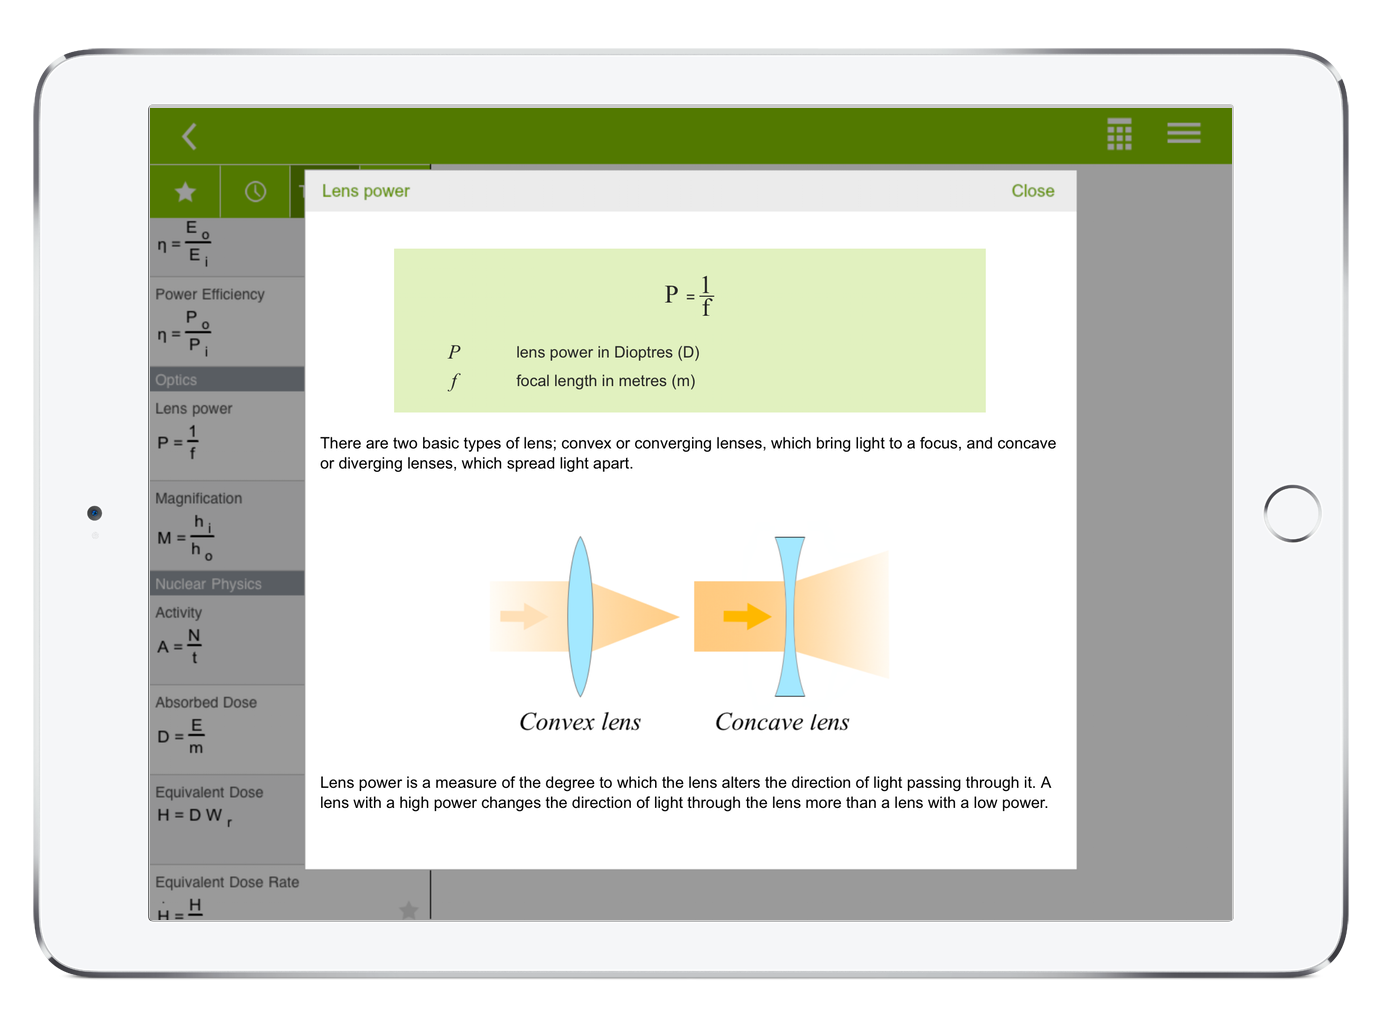 EquationLab contains rich information or story about each equation in Maths and physics so you can learn as you calculate.